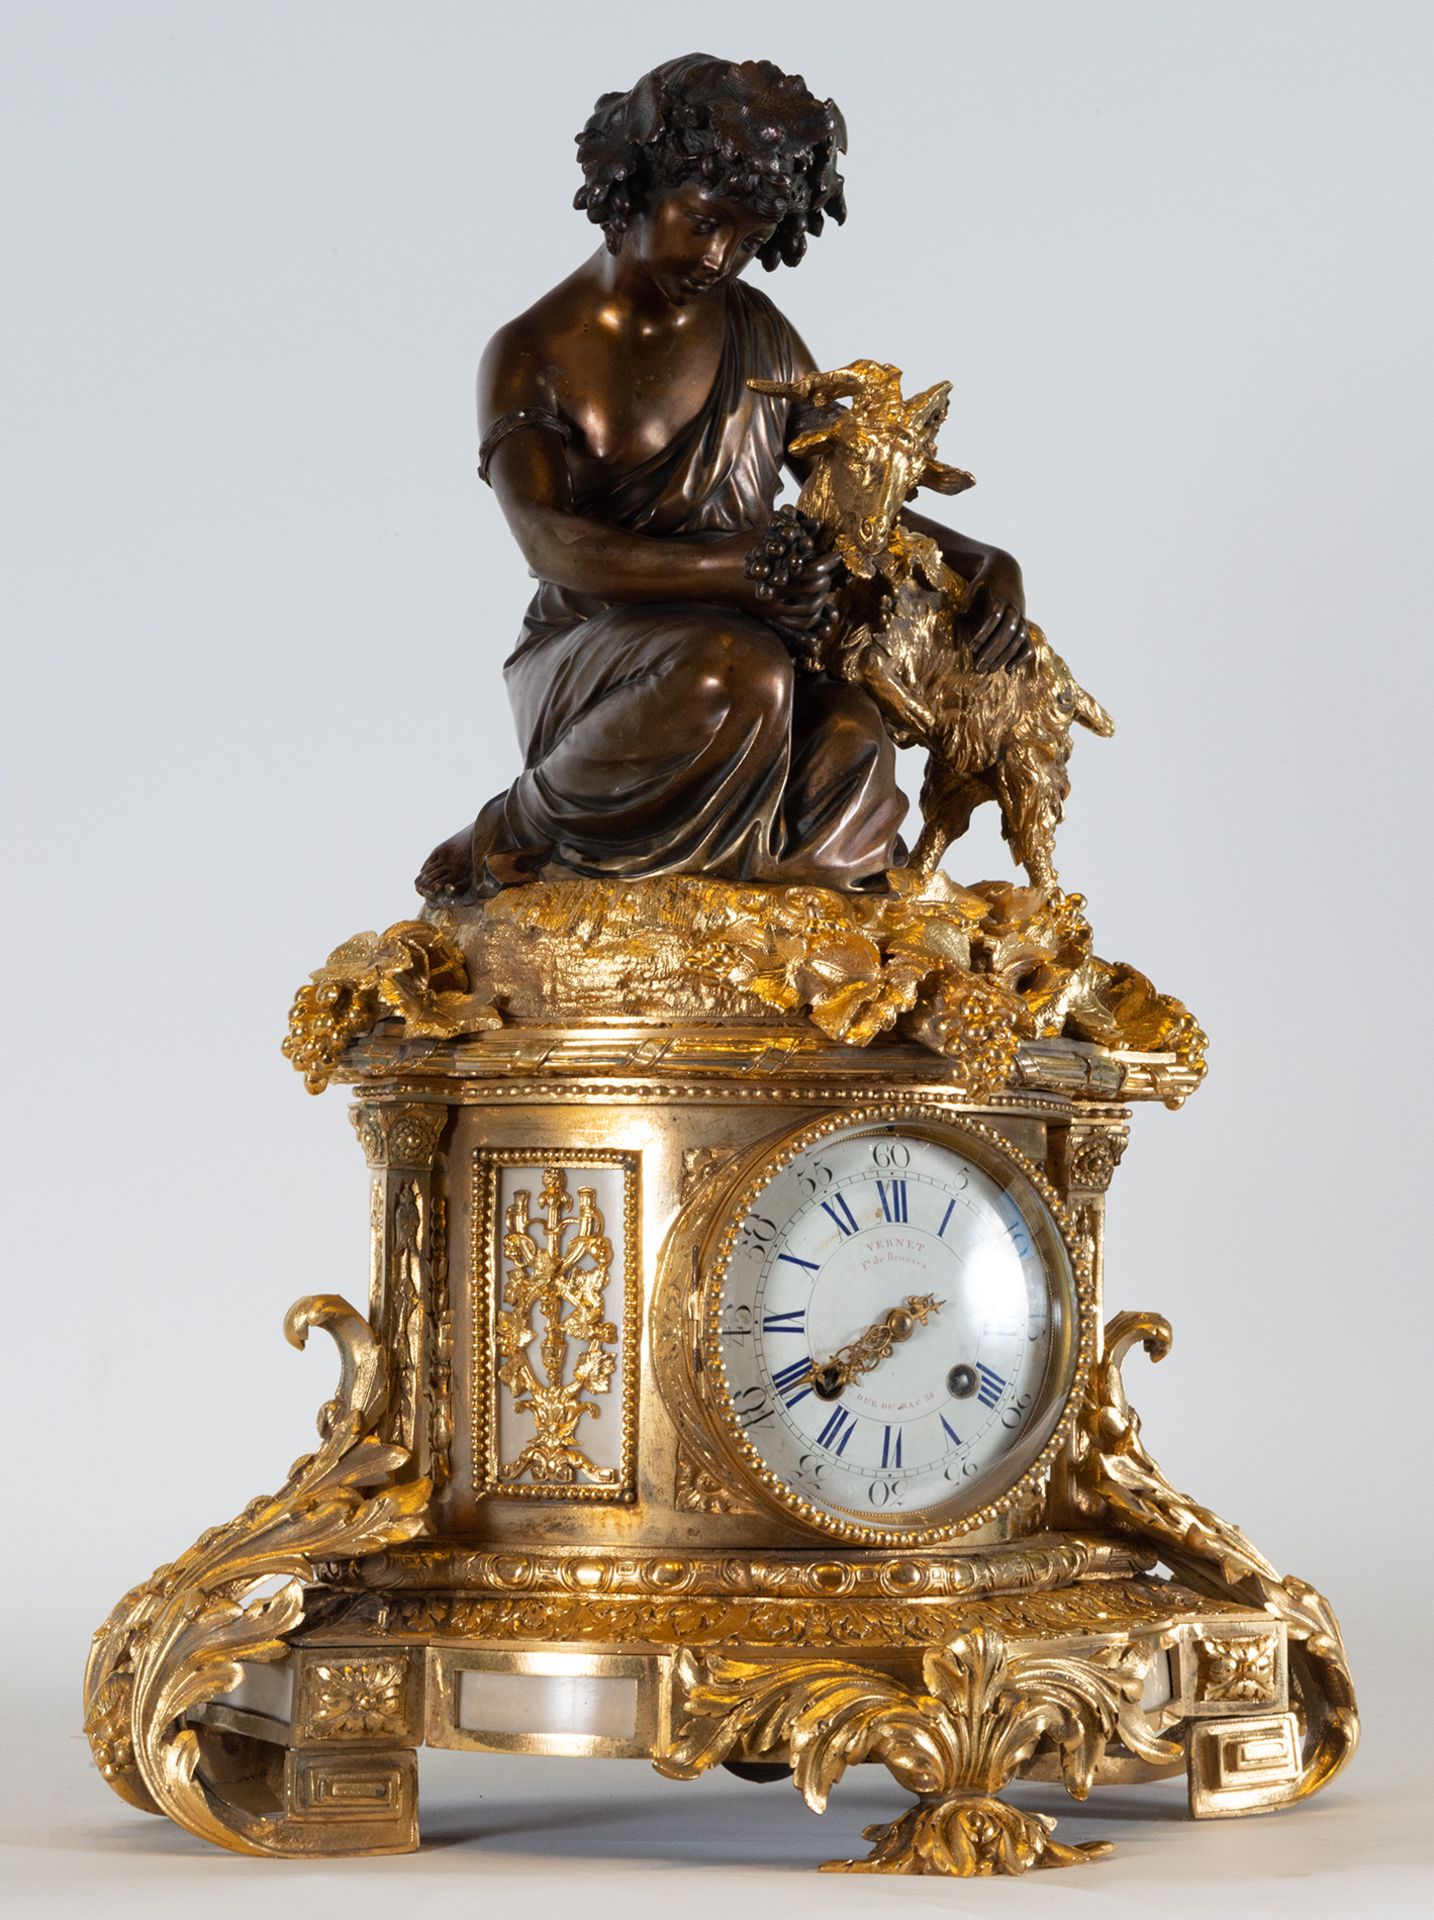 Exceptional Large French Tabletop Clock depicting Bacchus with Ram, Paris Machinery, circa 19th cent - Image 3 of 7